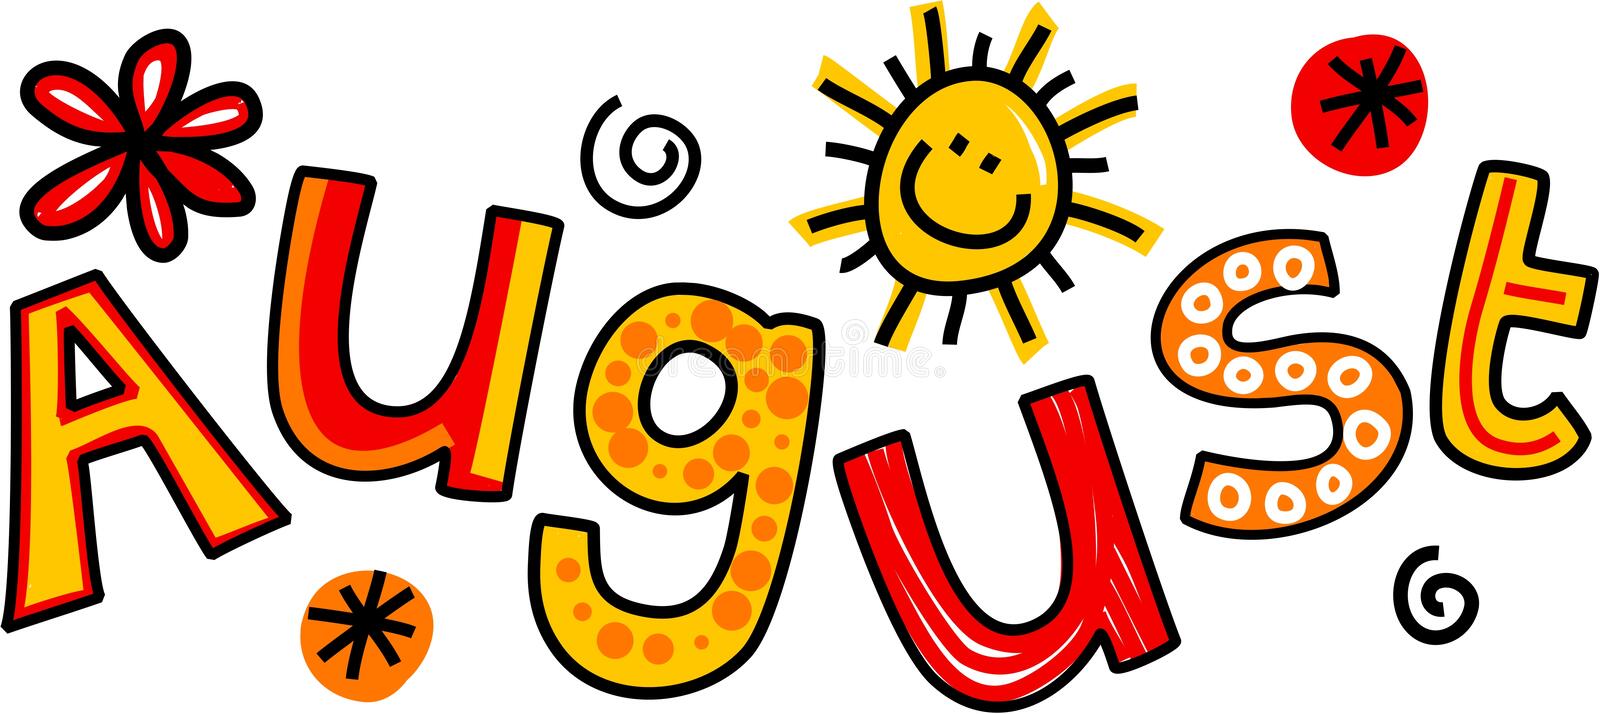 august clip art whimsical cartoon text doodle month 44872759